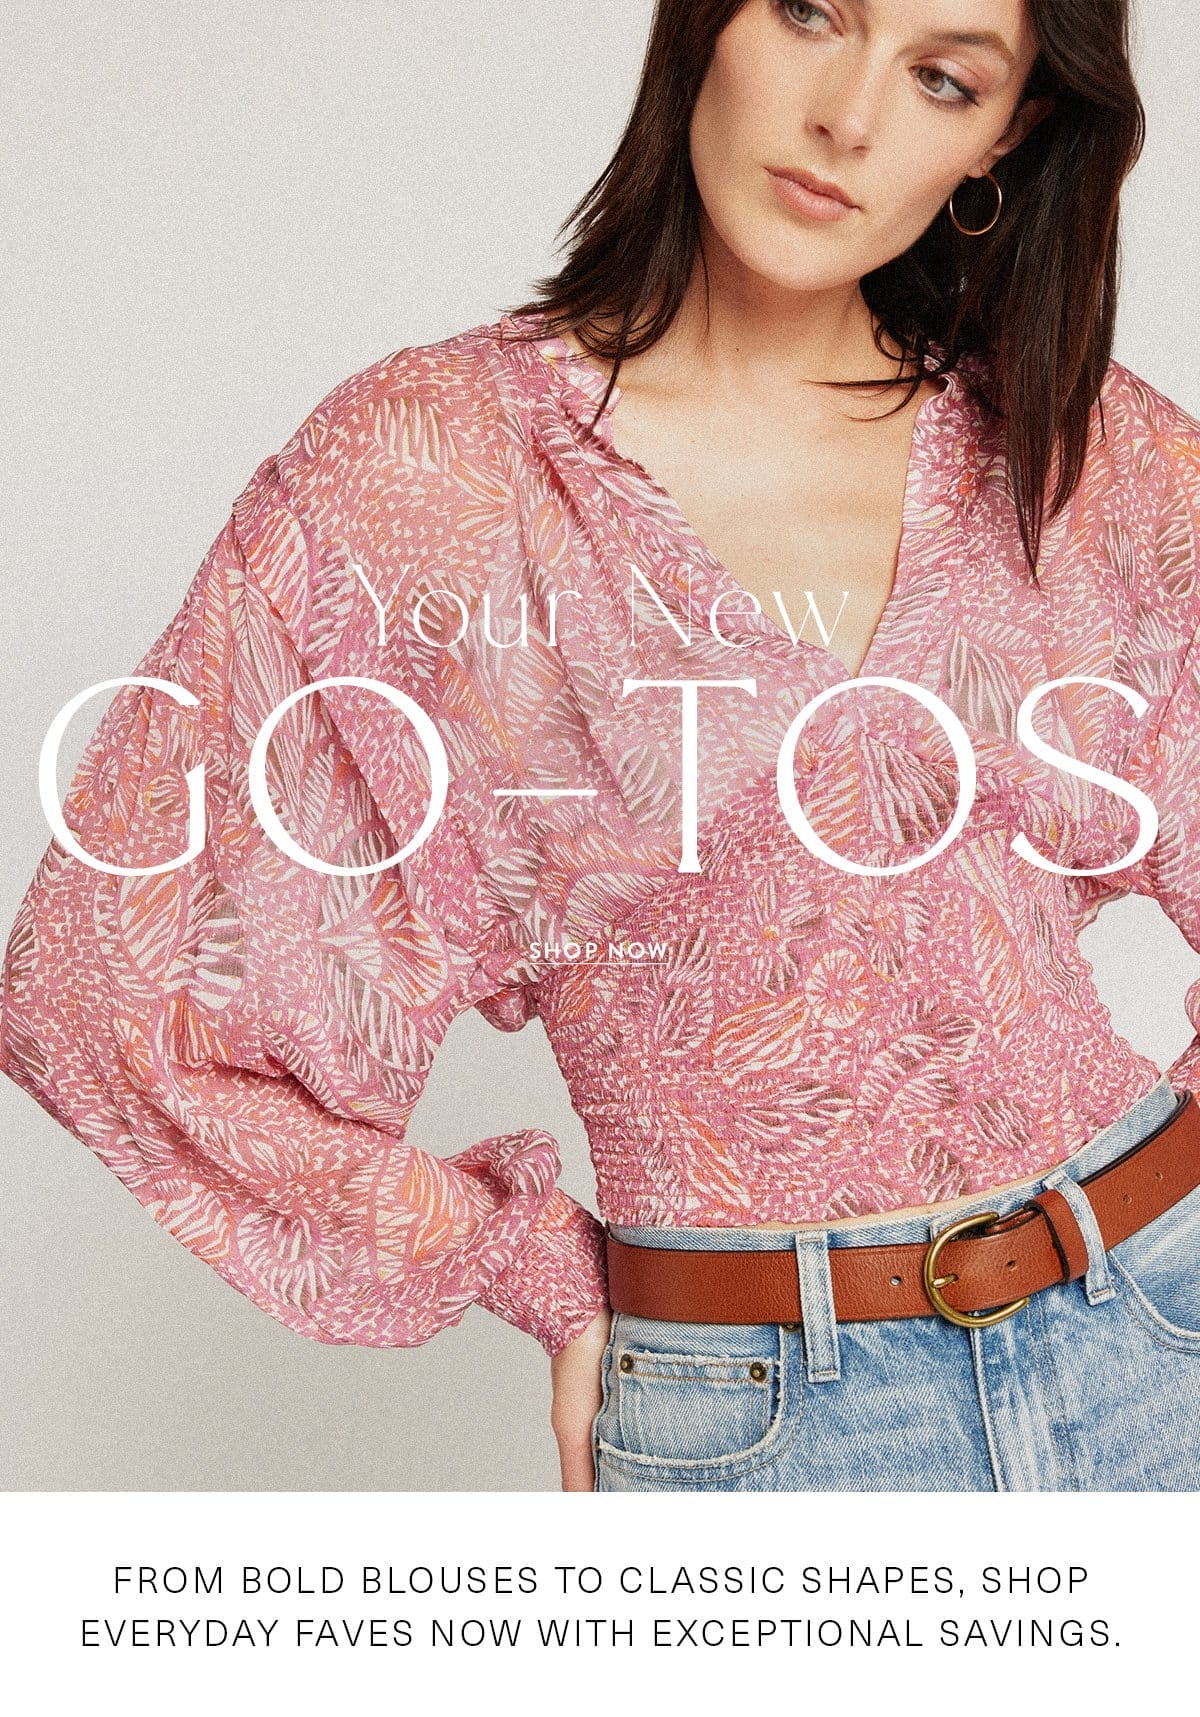 YOUR NEW GO-TOS SHOP NOW From bold blouses to classic shapes, shop everyday faves now with exceptional savings